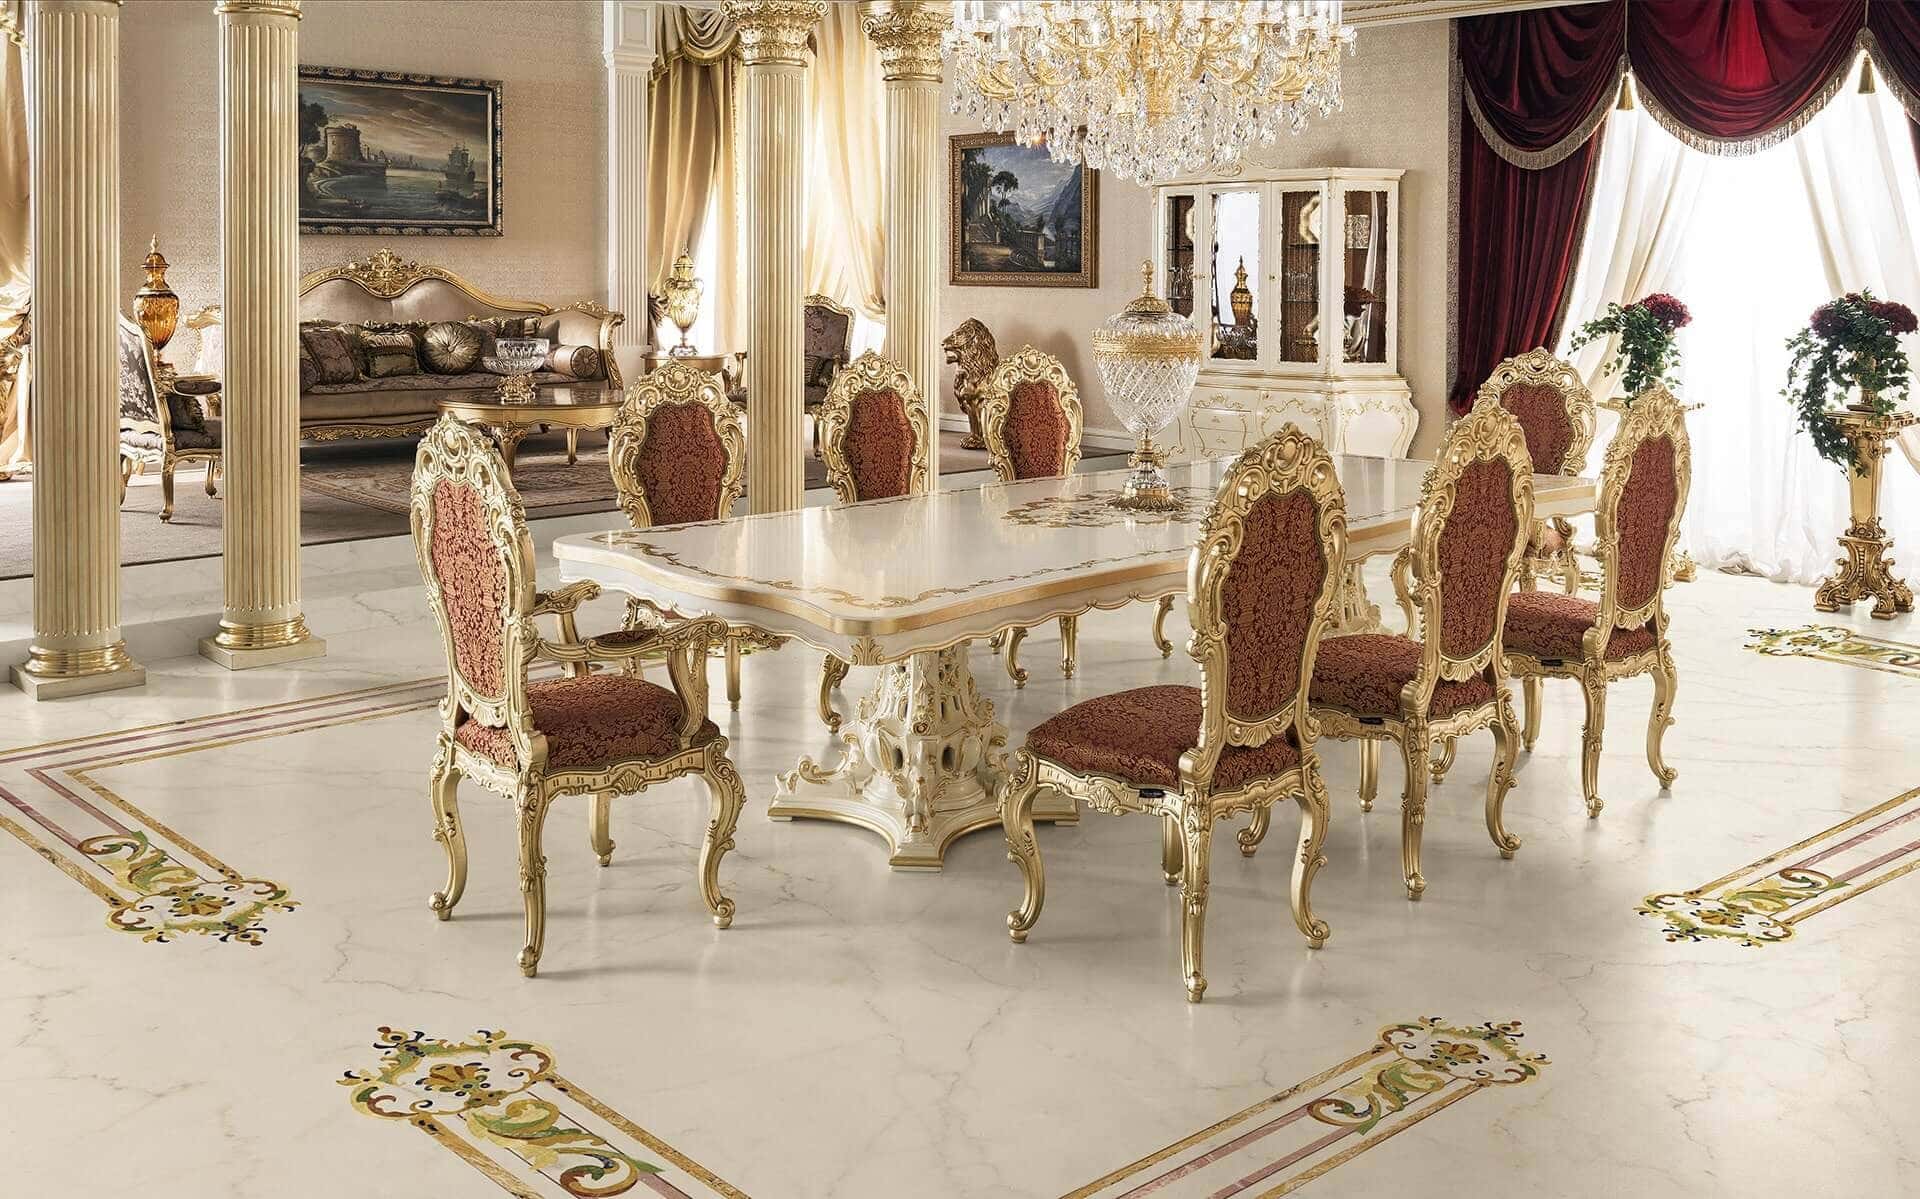 Luxury classic Italian furniture bespoke dining table handmade solid wood craftsmanship best quality materials high-end details; venetian style dining set handmade carved chairs and solid wood lacquered dining table with personalized golden leaf paintings and decorations. Made in Italy fabric selection, best quality classic Italian furniture.